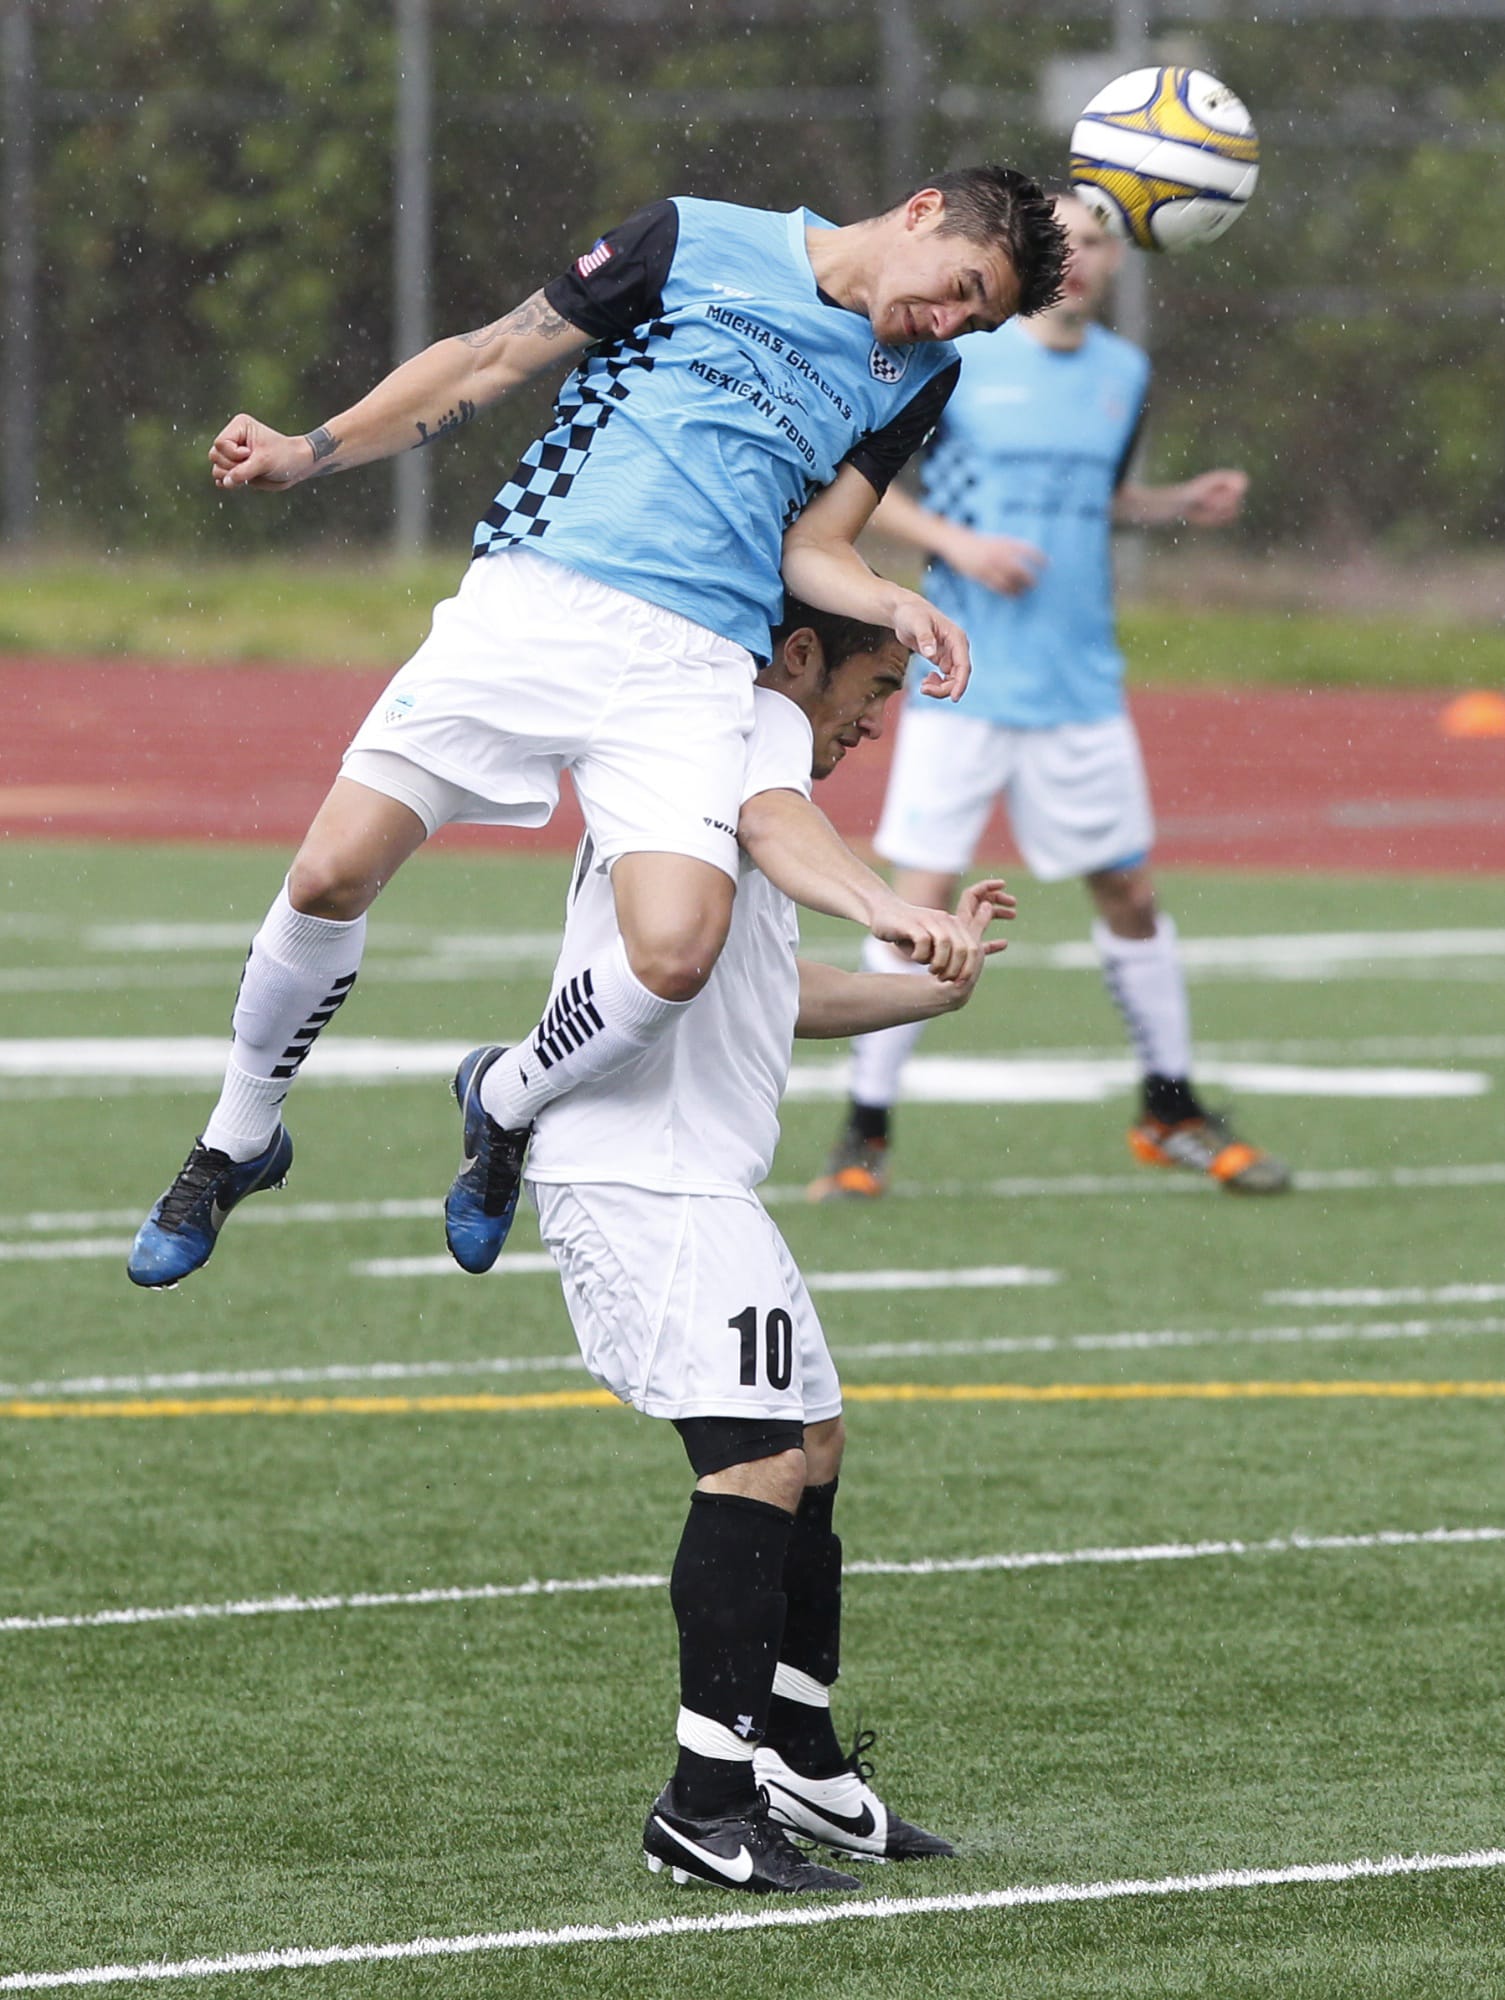 Vancouver's Bryanth Garcia-Junco heads ball over Westsound's Cameron Stone (10) during Sunday's 4-0 Vancouver victory.